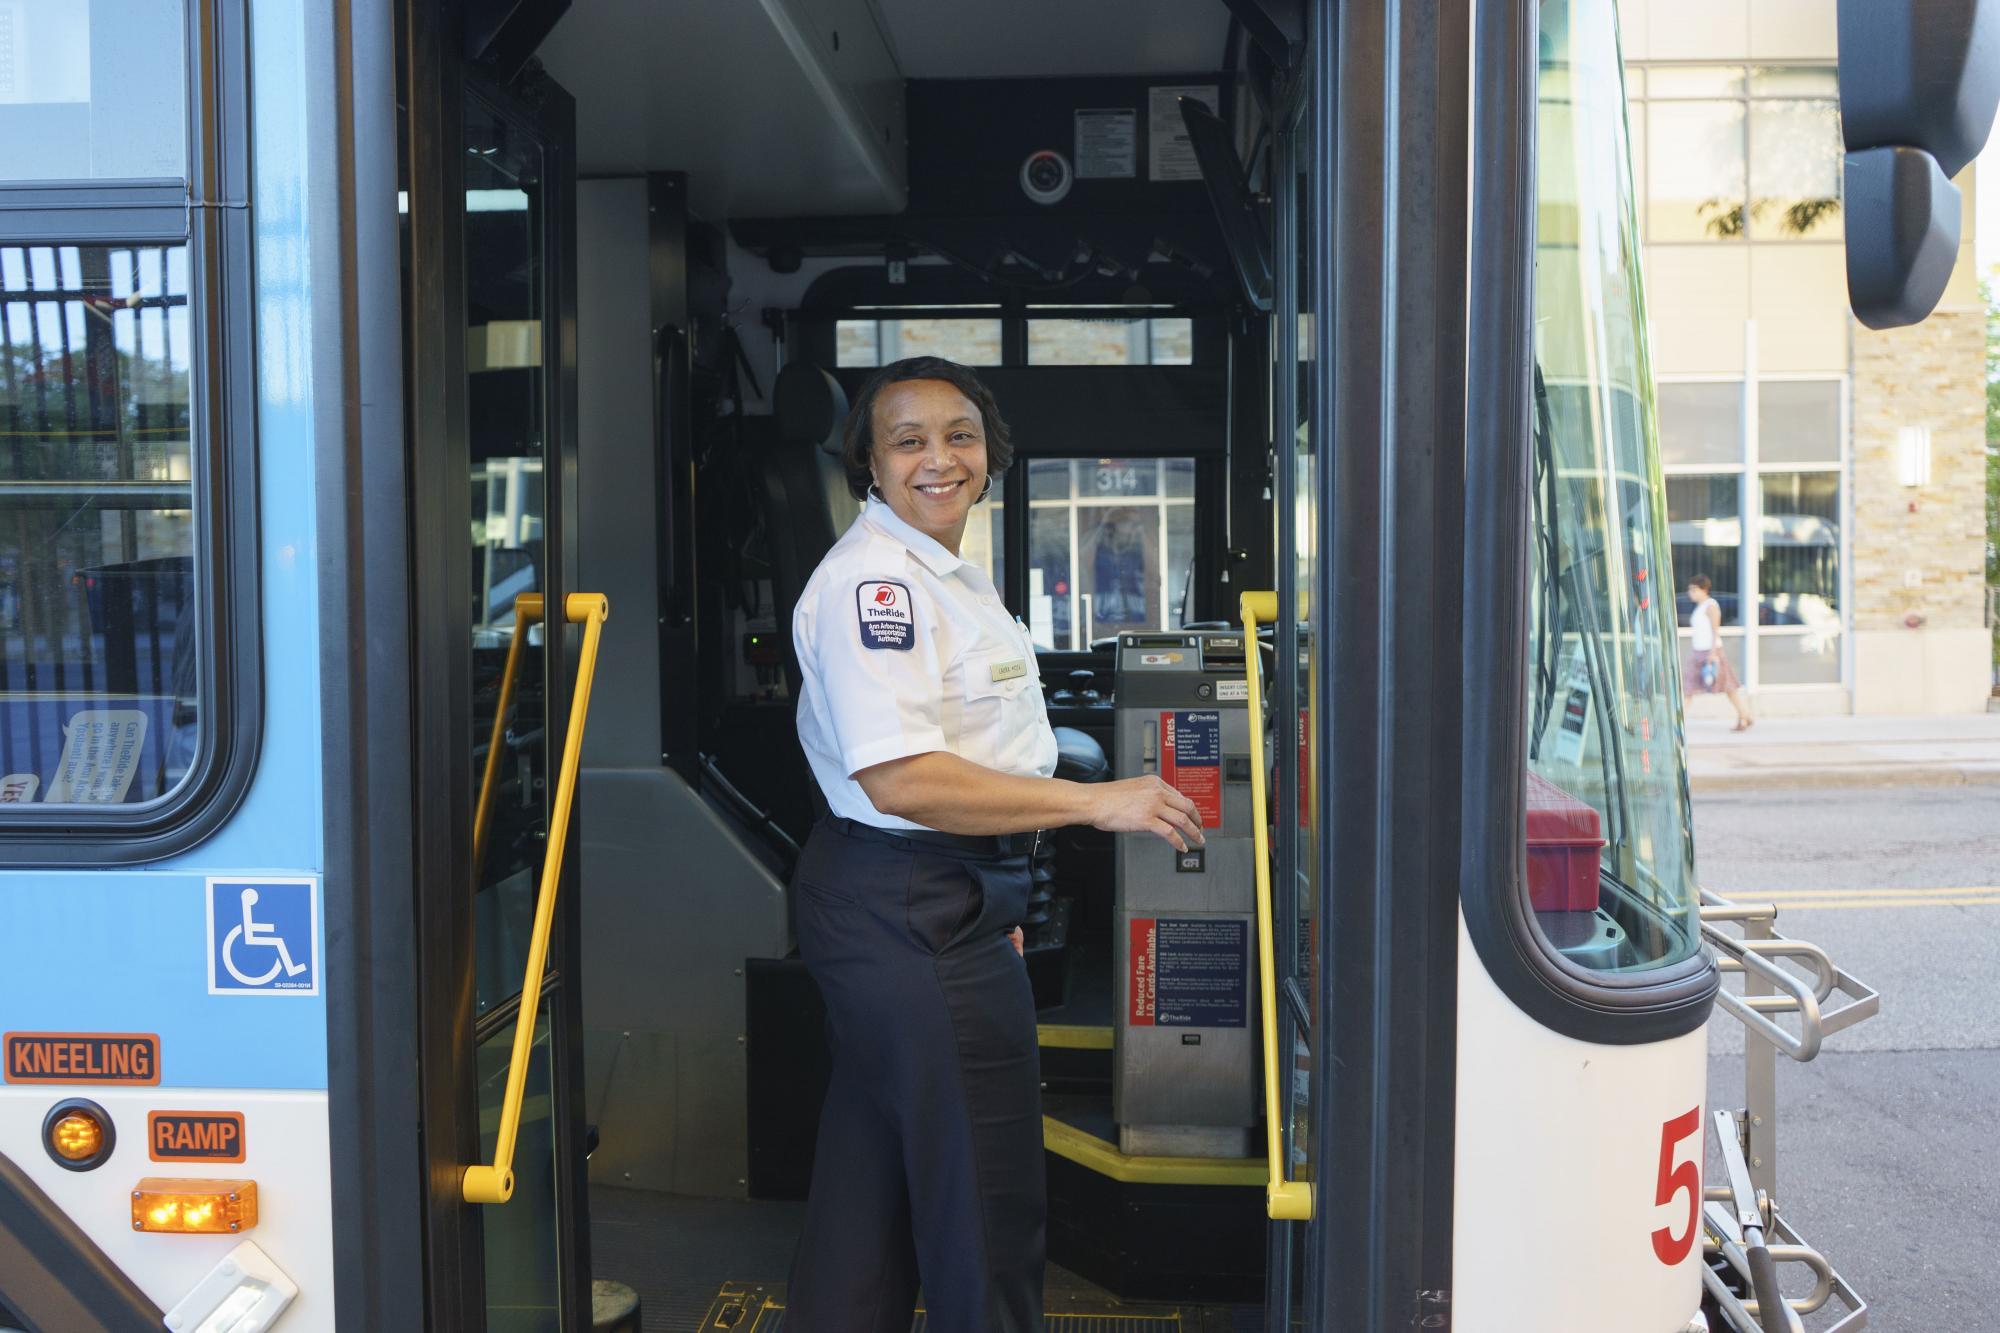 A bus driver gets ready to board her bus for her shift.